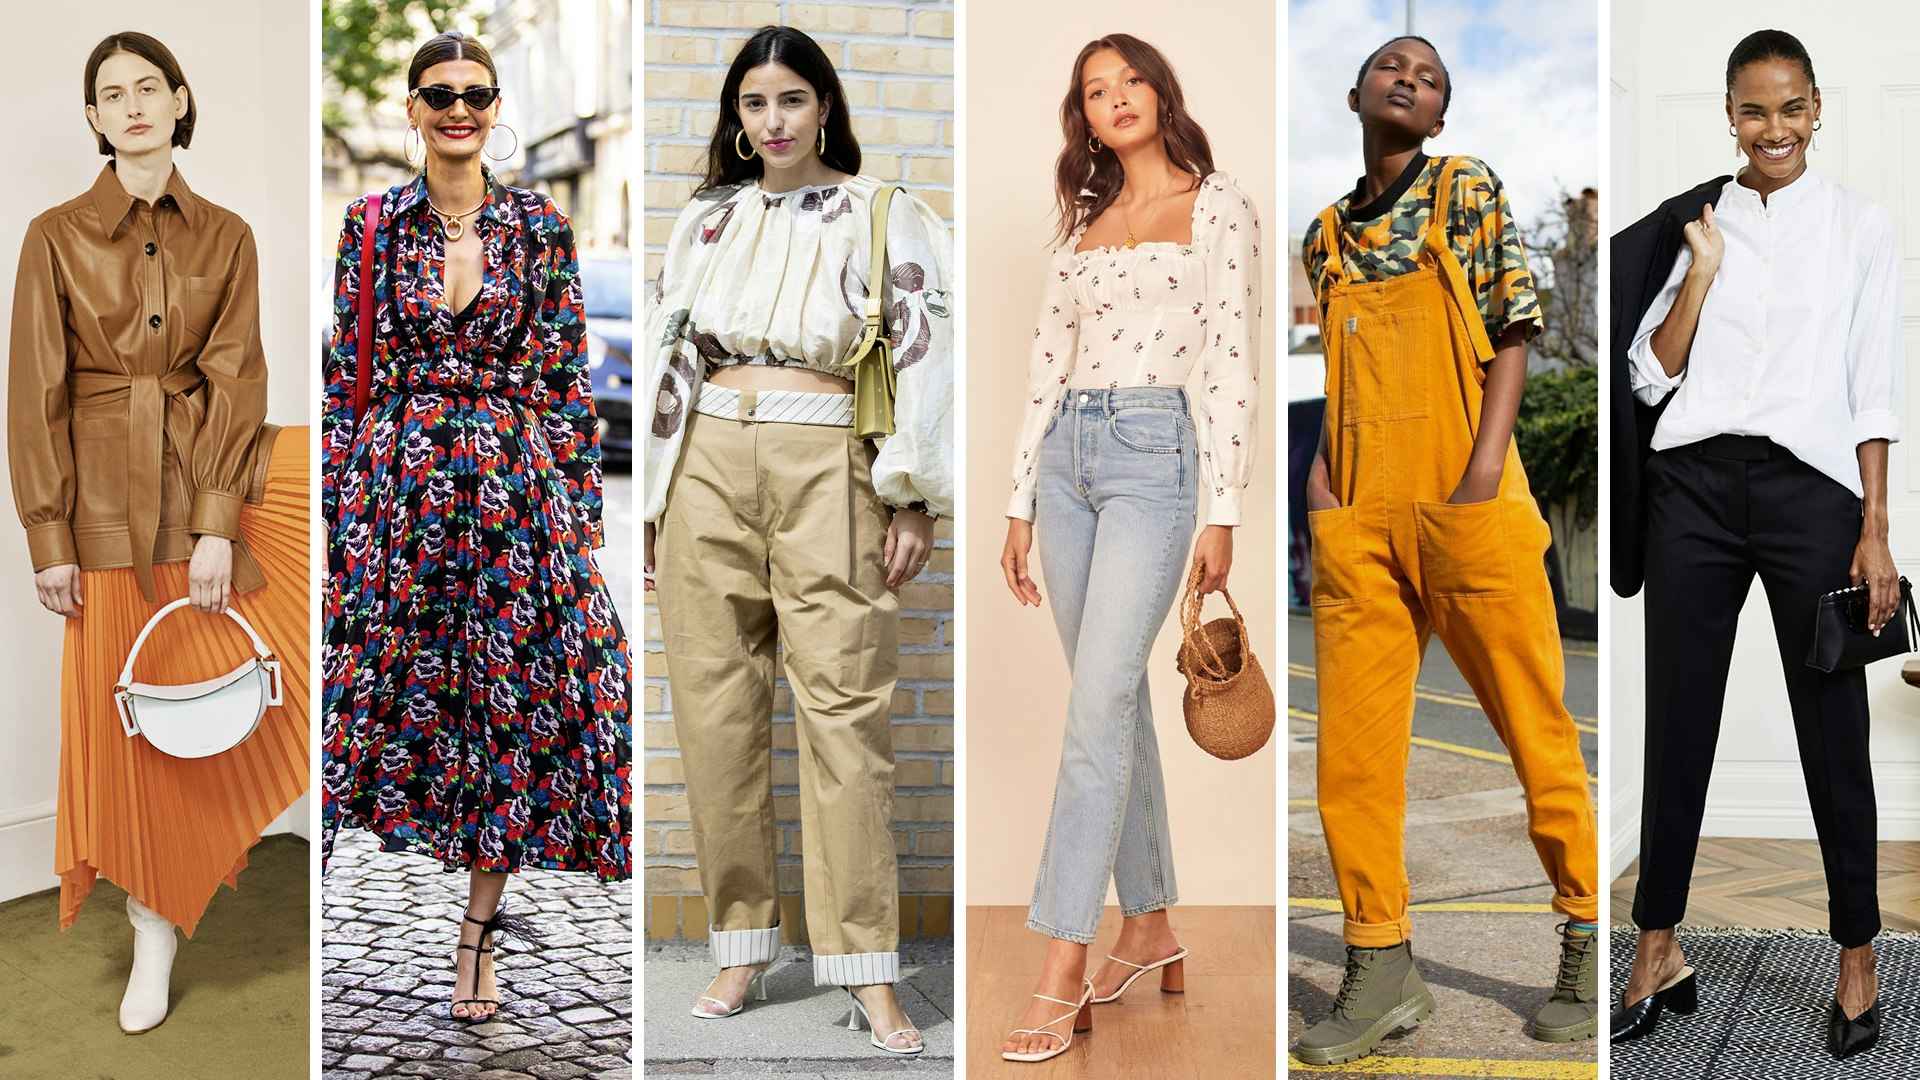 Don't despair, here are five outfits you can wear instead of the floral midi